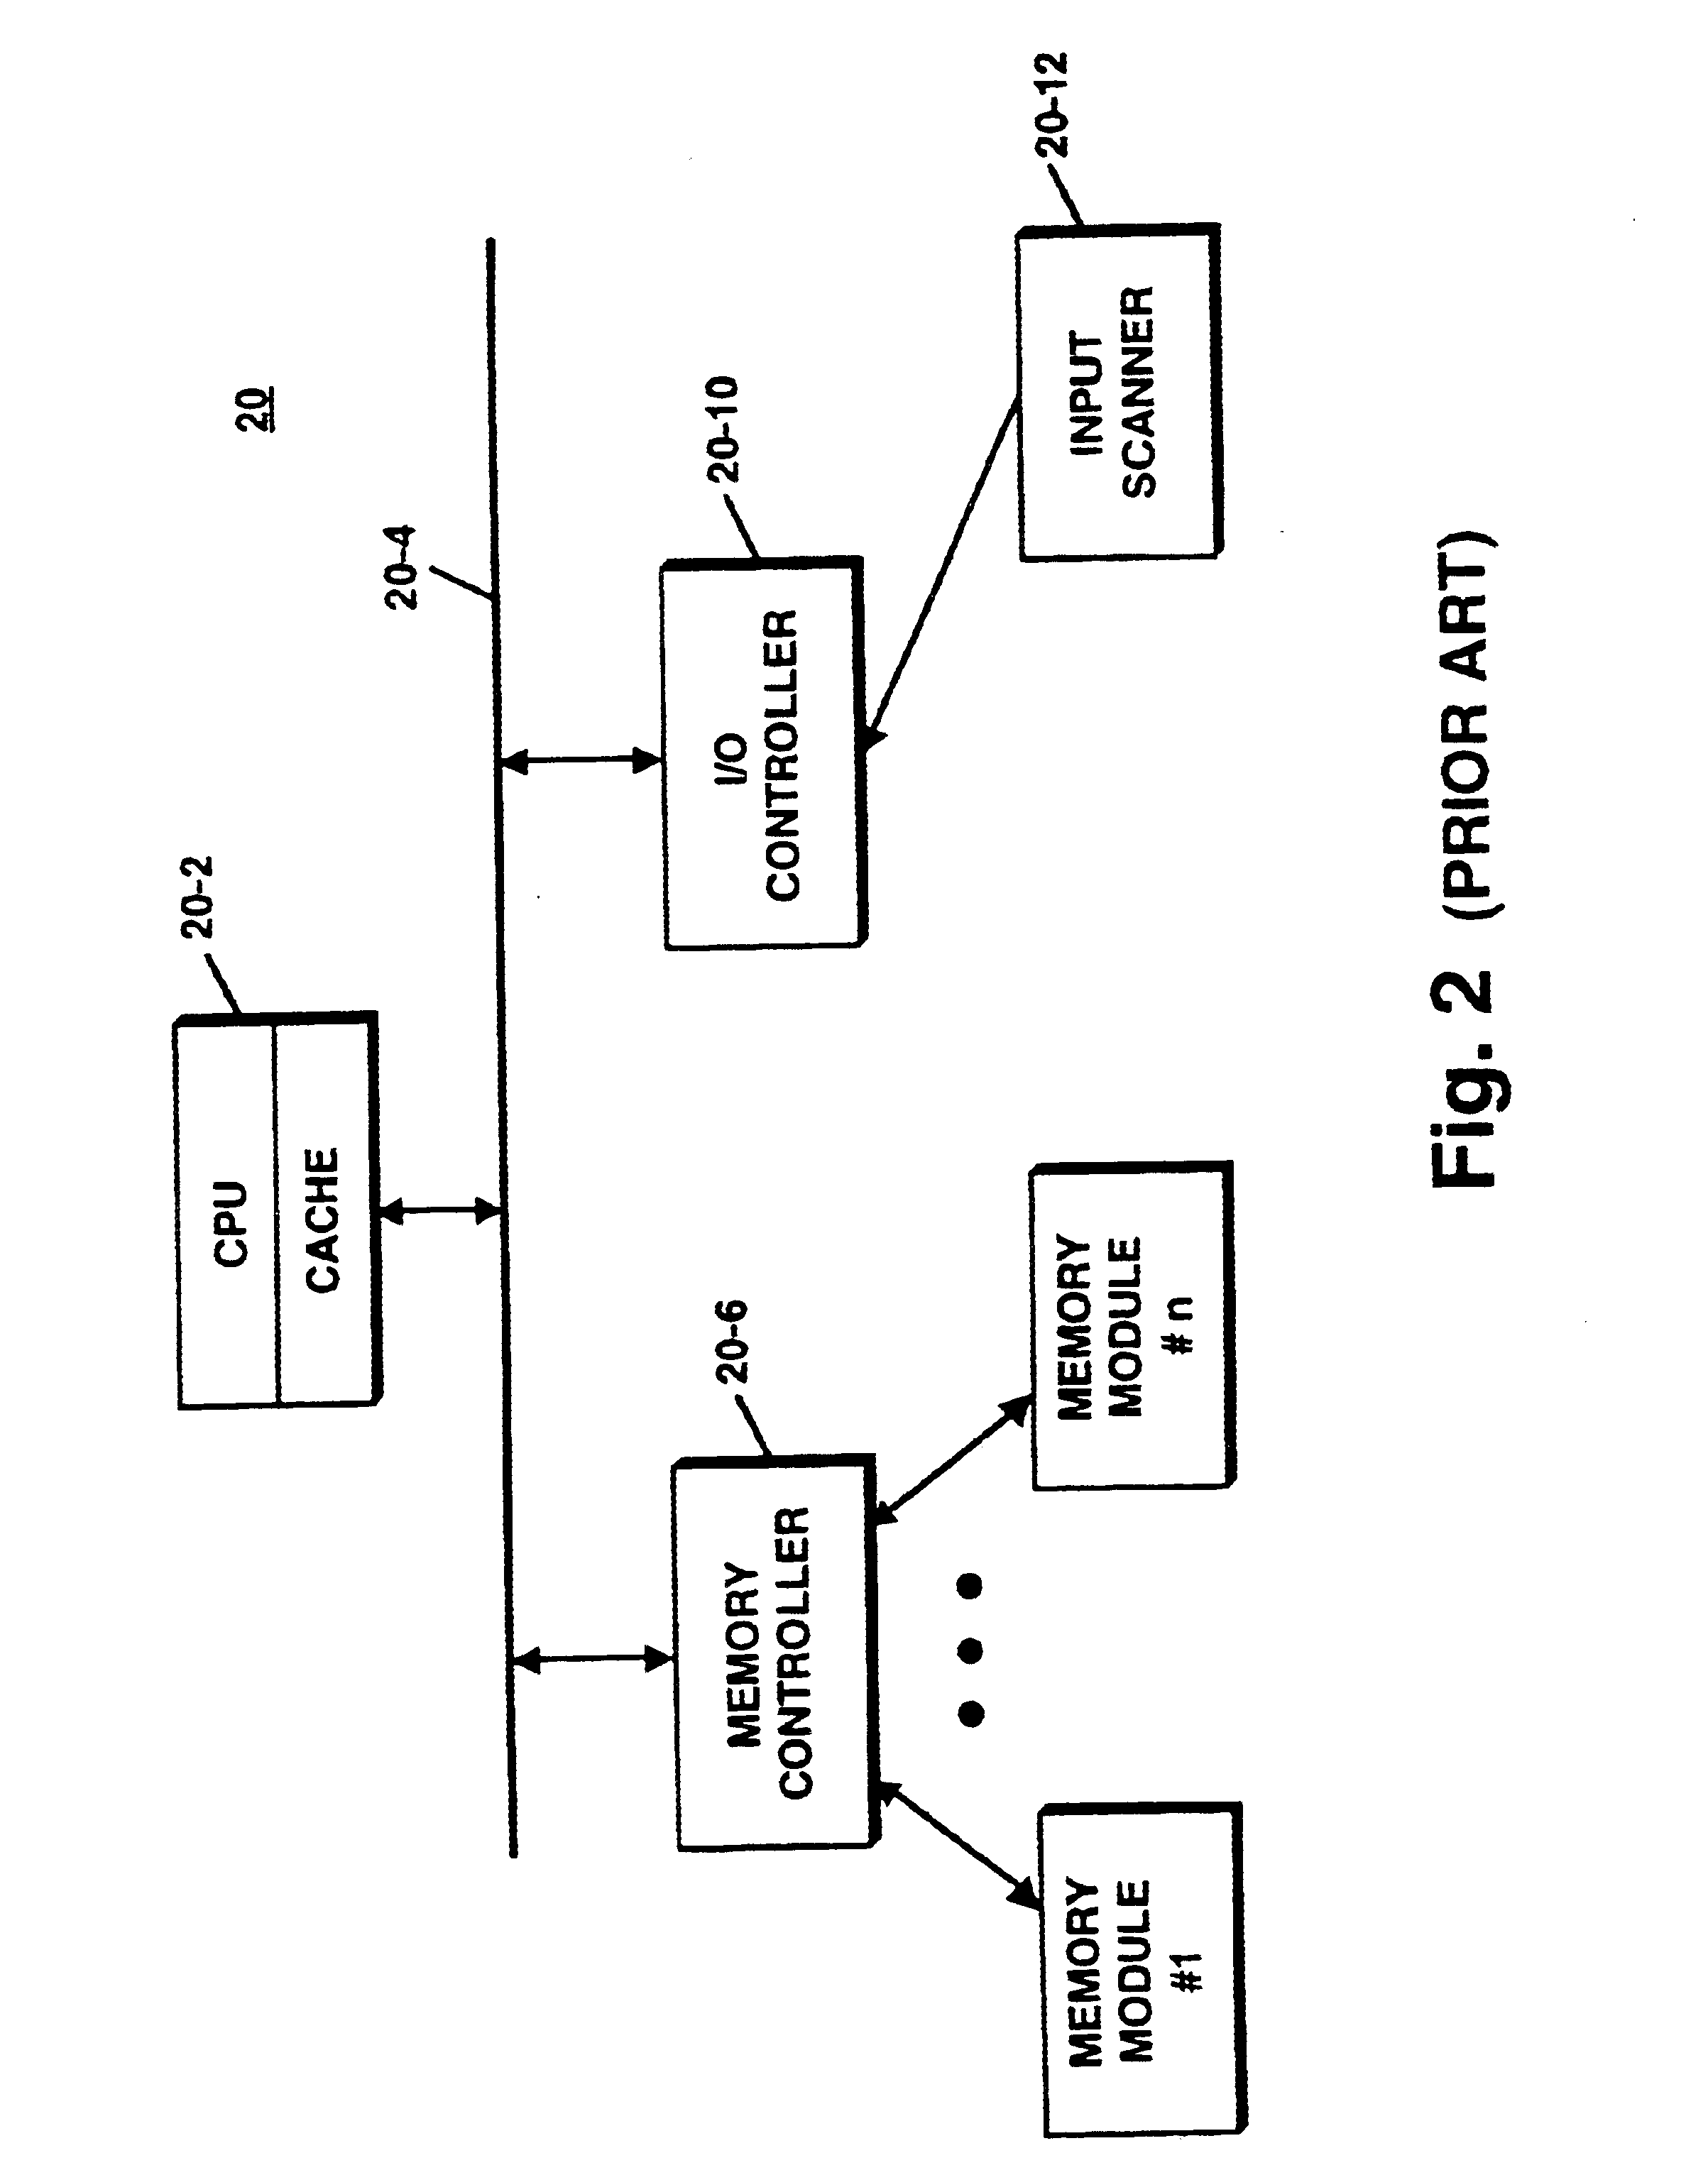 Method and system for improving pattern recognition system performance